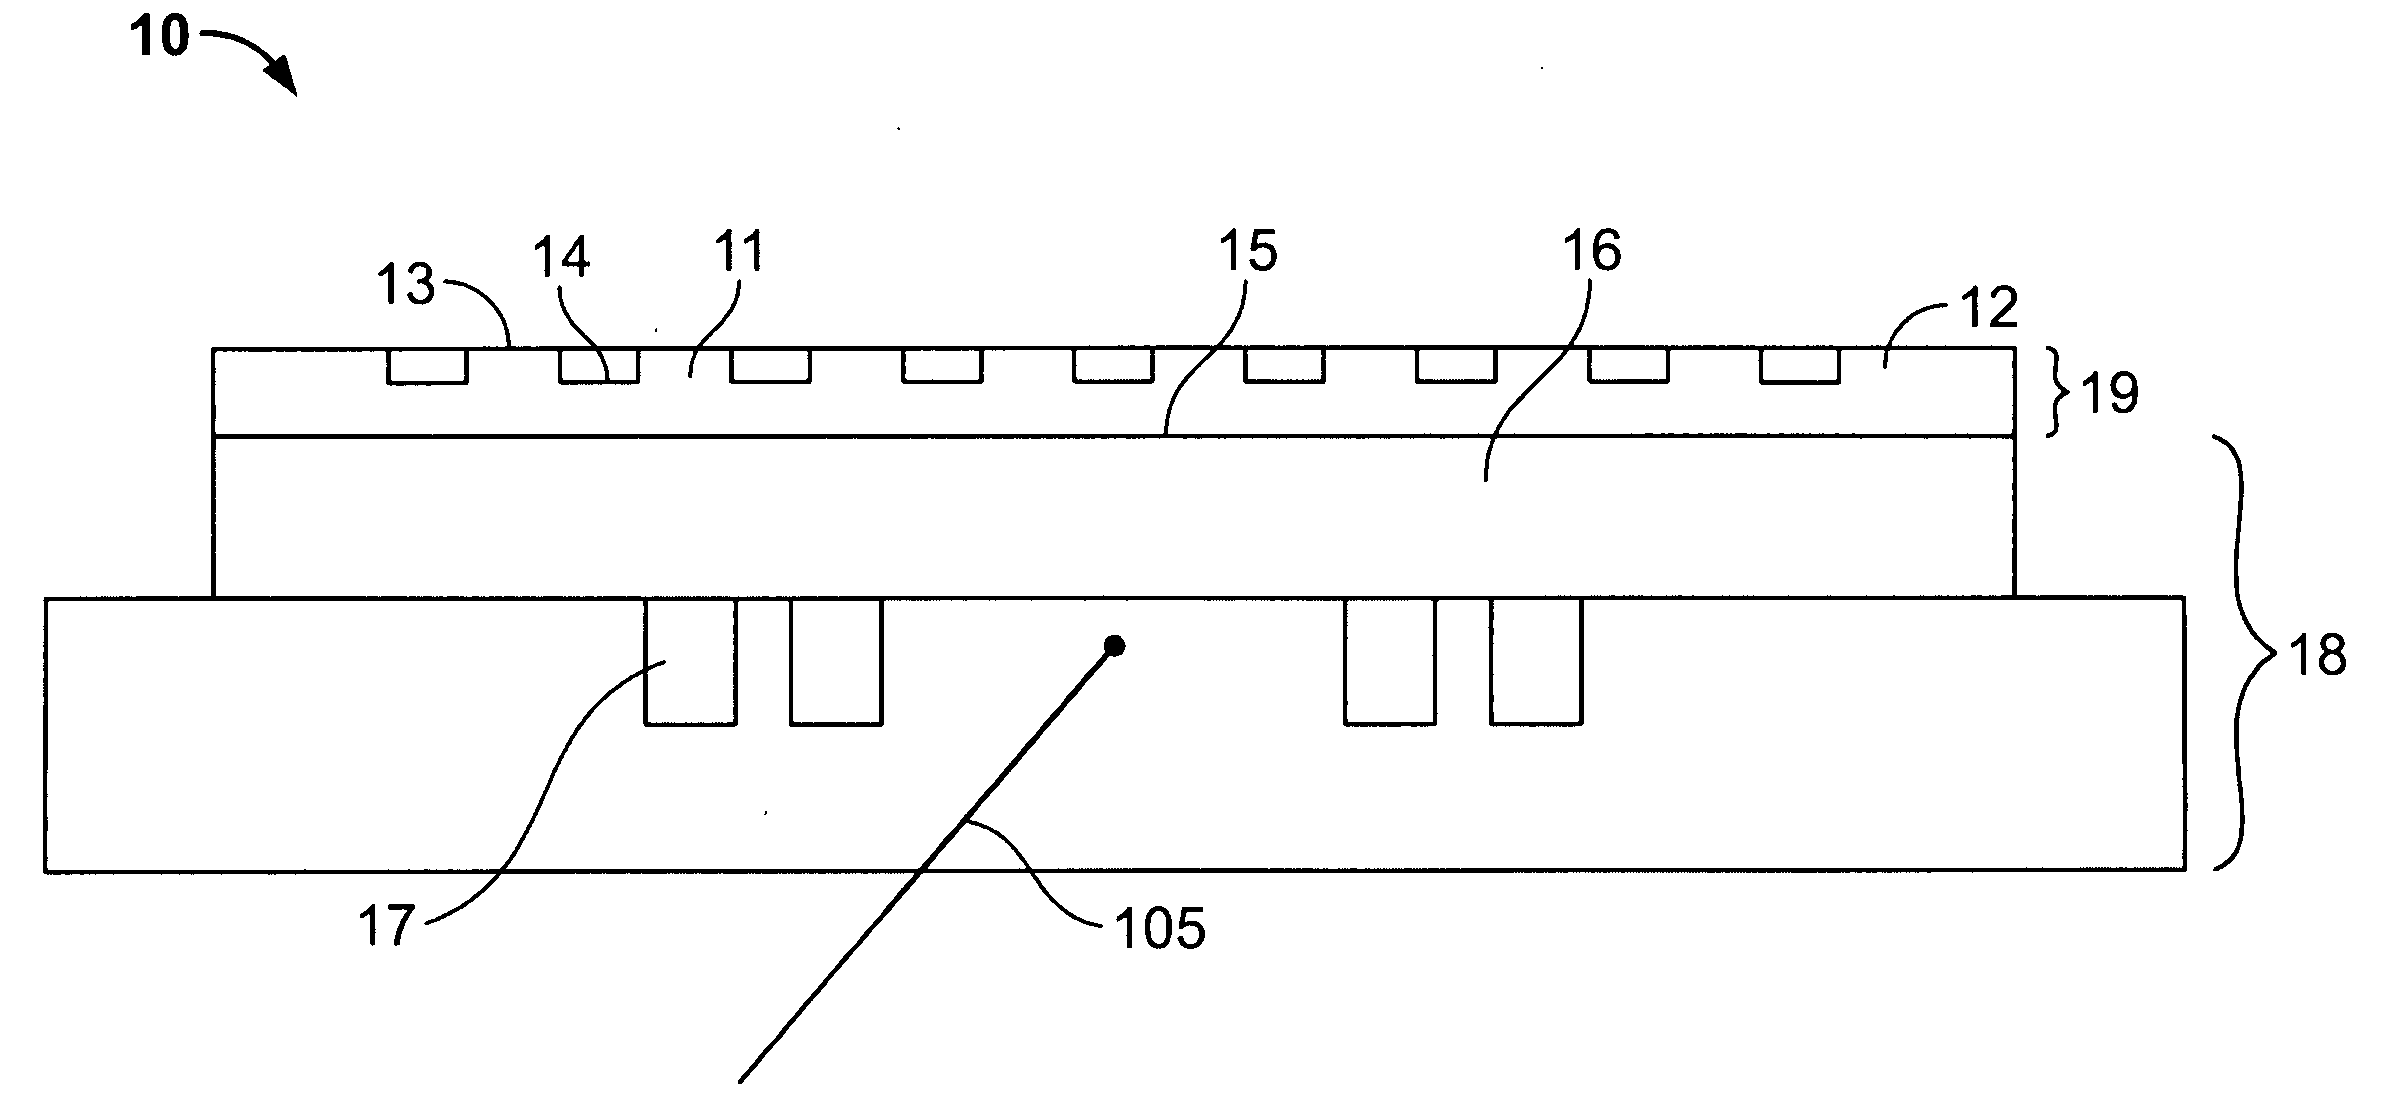 Method of determining a target mesa configuration of an electrostatic chuck